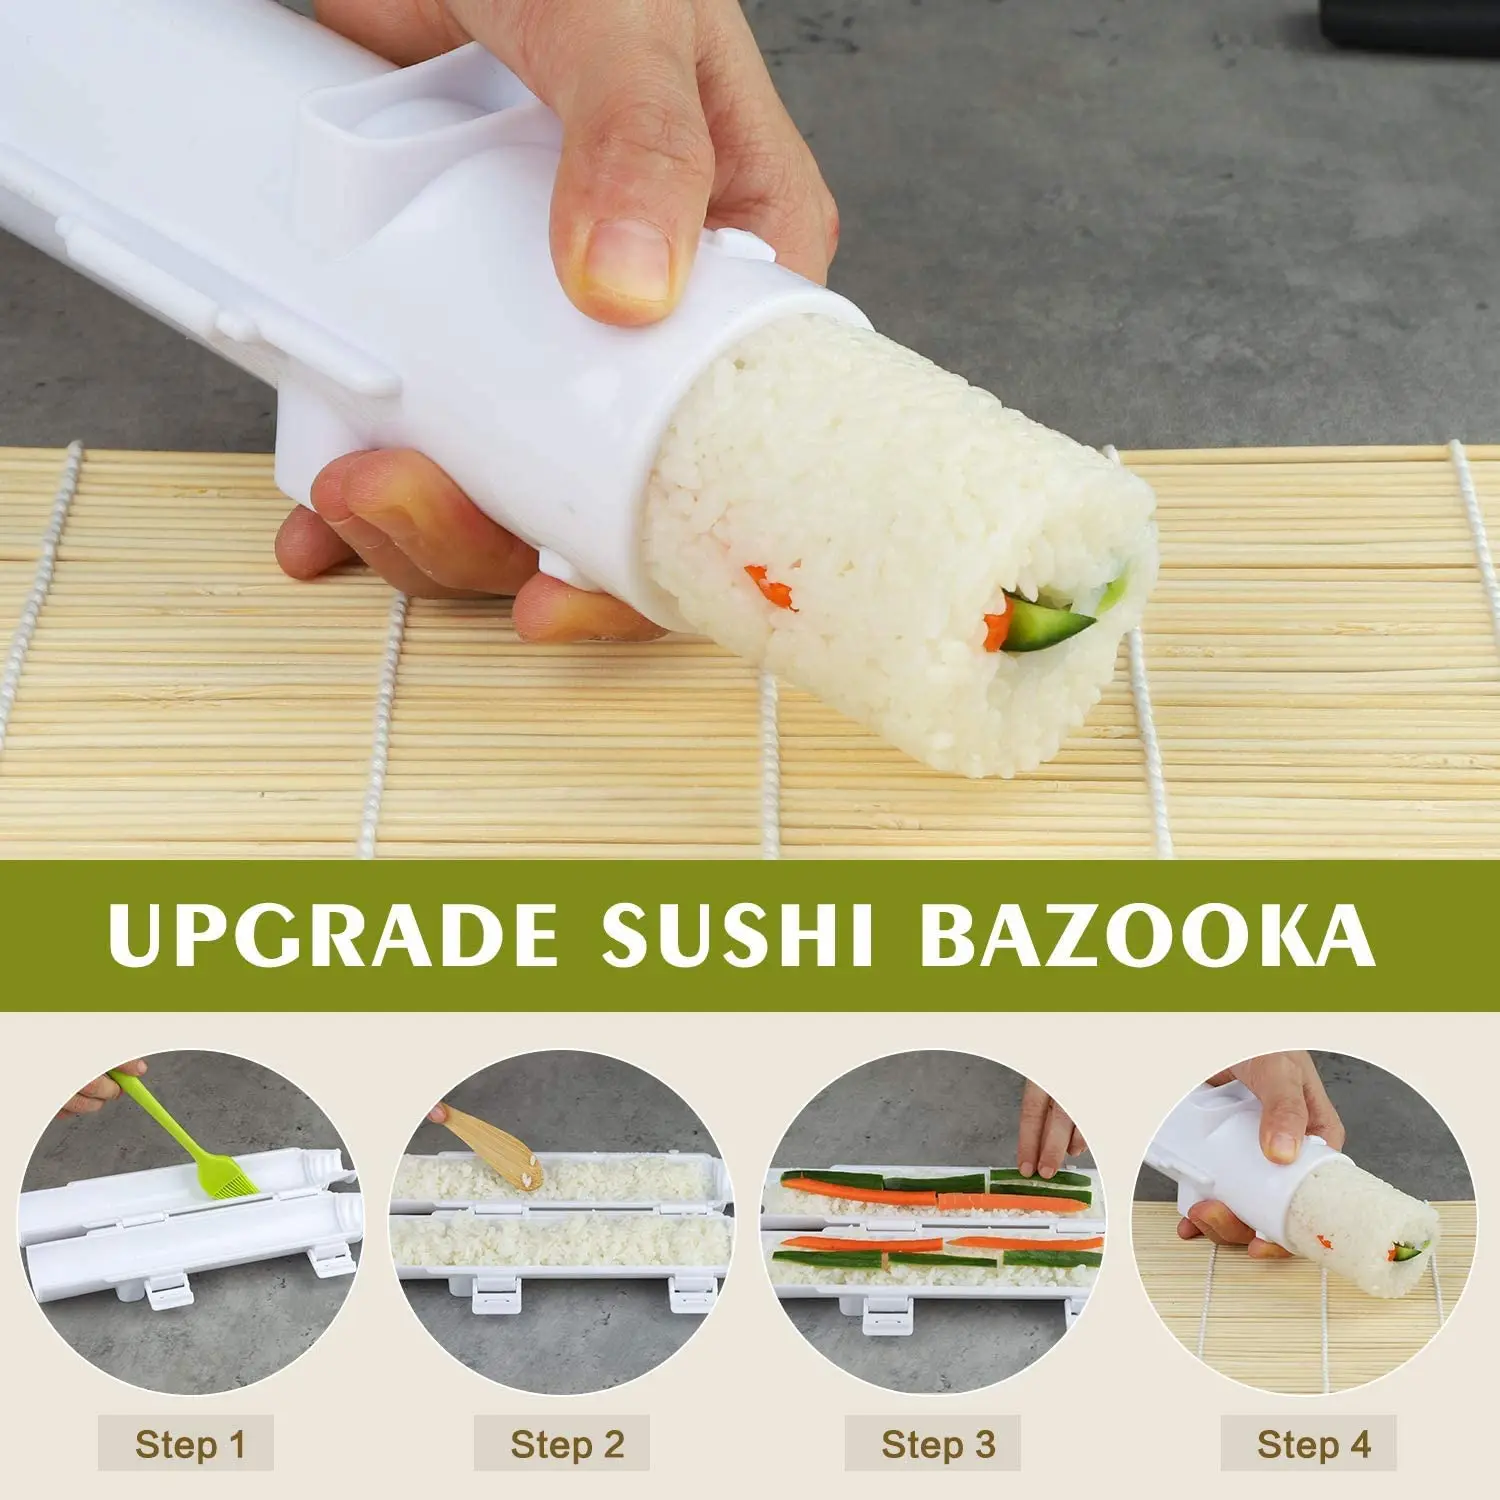 https://ae01.alicdn.com/kf/Sf2959adccba042b6a9927c717df27a68J/Rolling-Sushi-Mold-Quick-Rice-Maker-Roller-Mold-Vegetable-Meat-Roll-Gadgets-Home-DIY-Sushi-Device.jpg